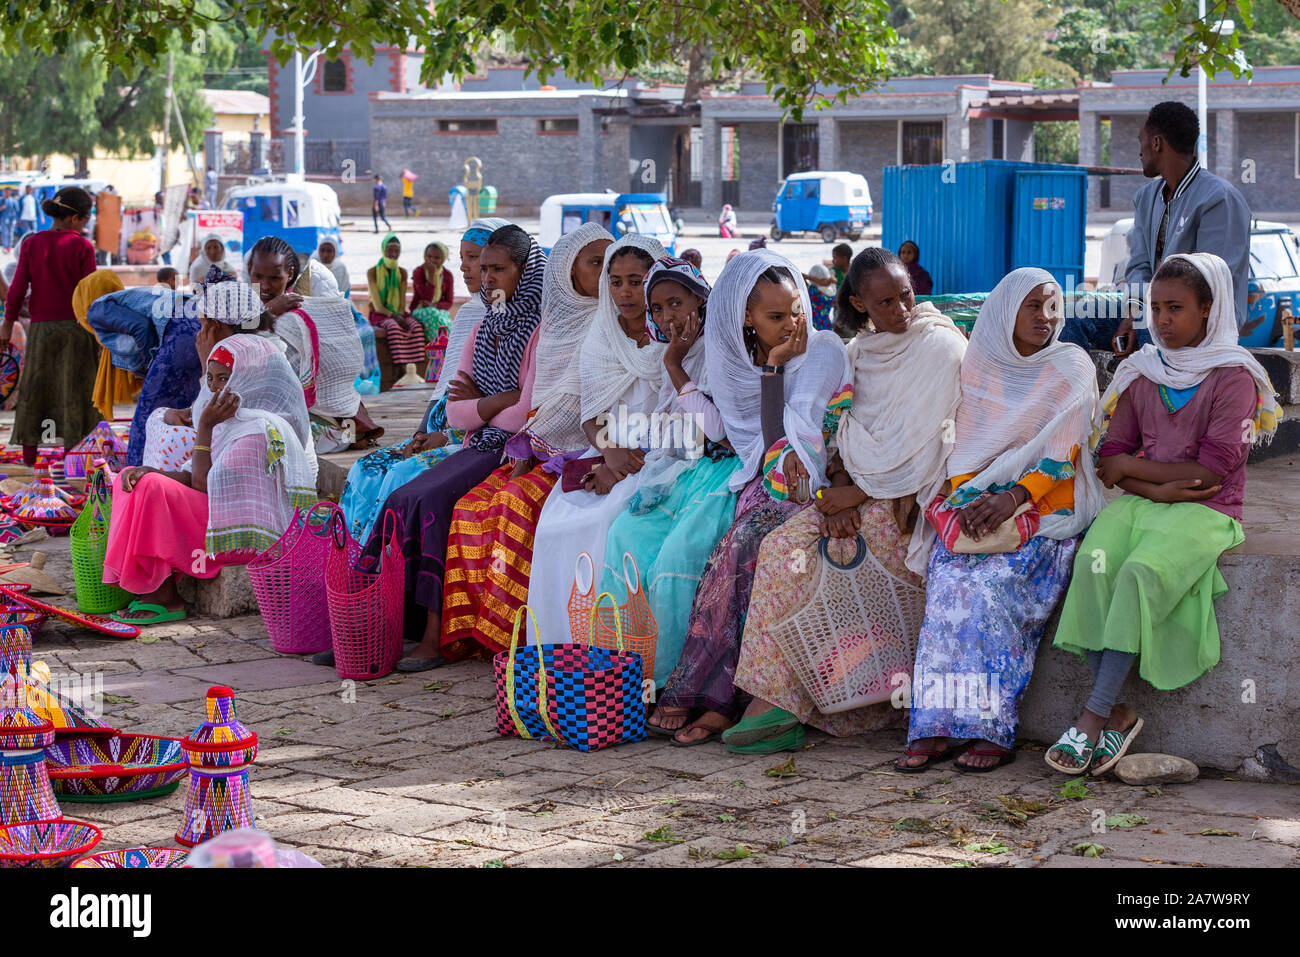 AXUM, ETHIOPIA, APRIL 27th.2019: Street market in center of Aksum, ethiopian women selling baskets in the traditional basket market on April 27, 2019 Stock Photo